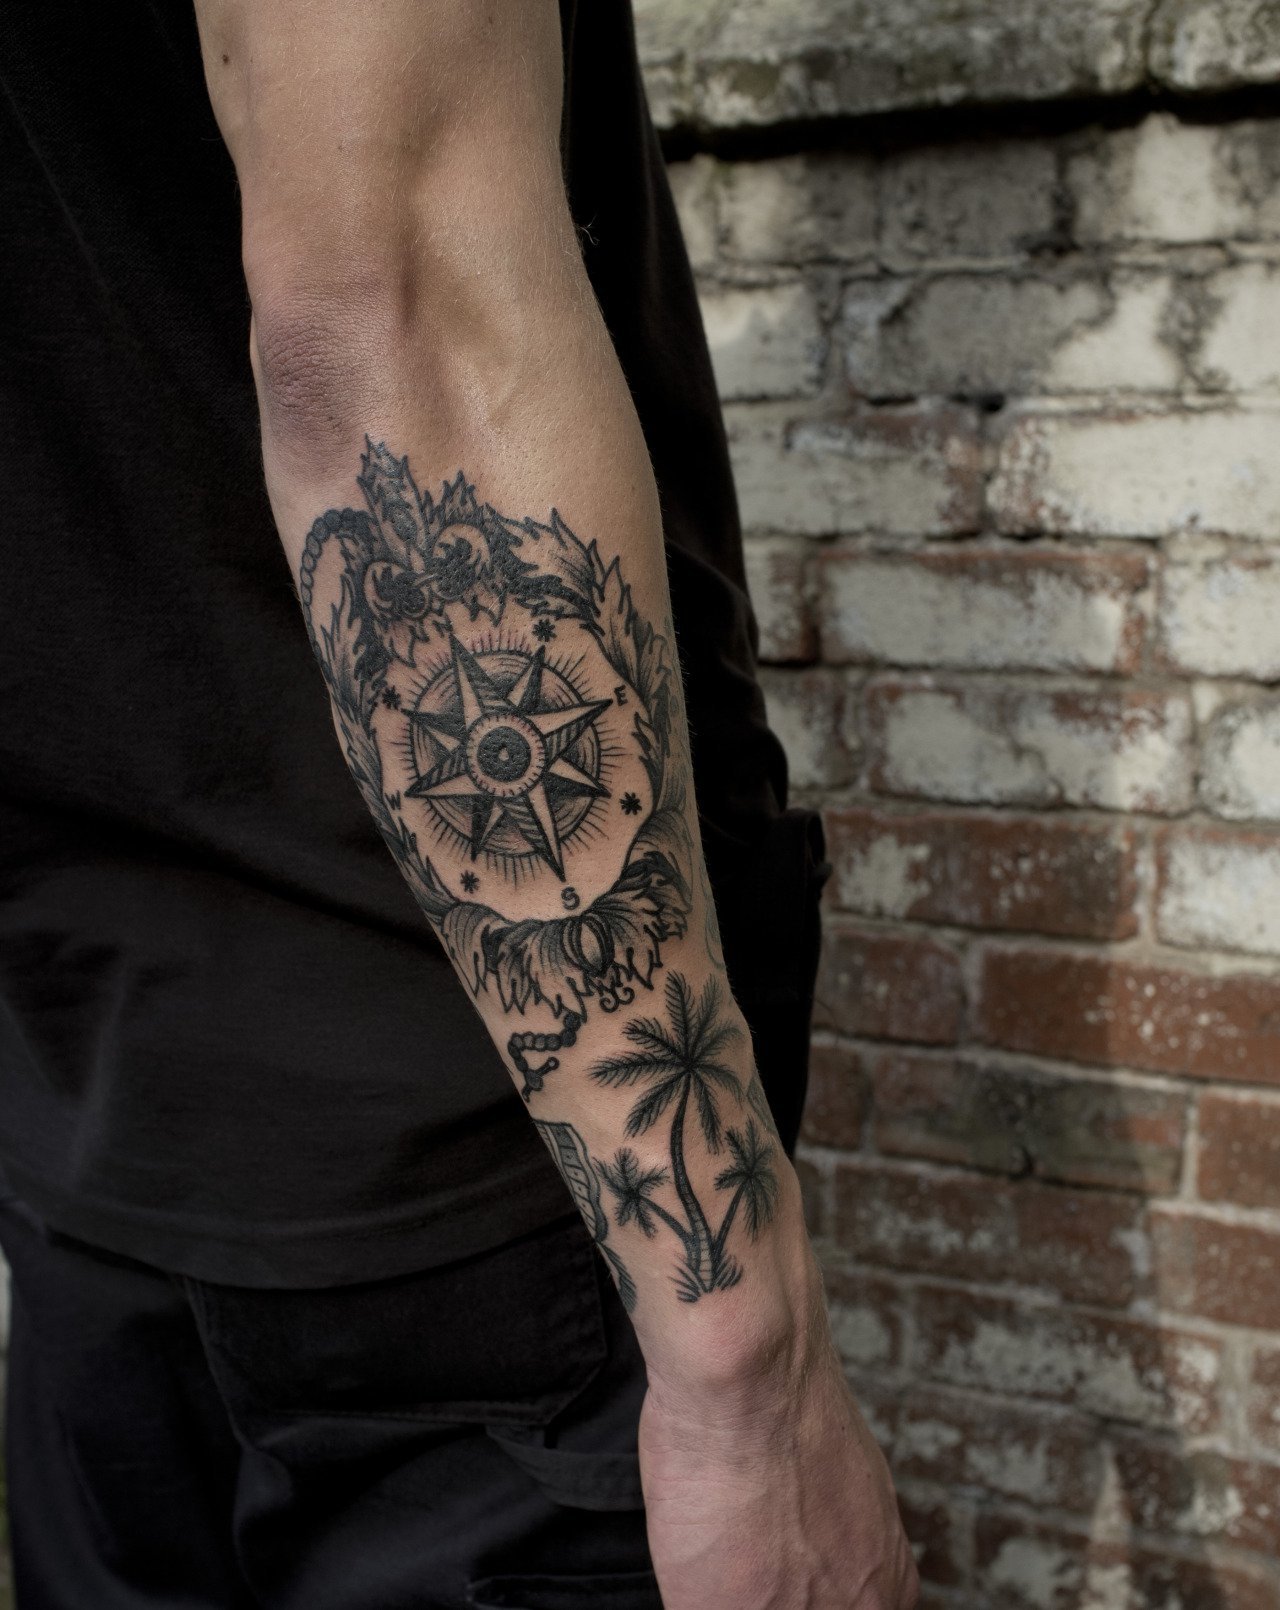 40+ Travel Inspired Tattoos for the Wanderer in You